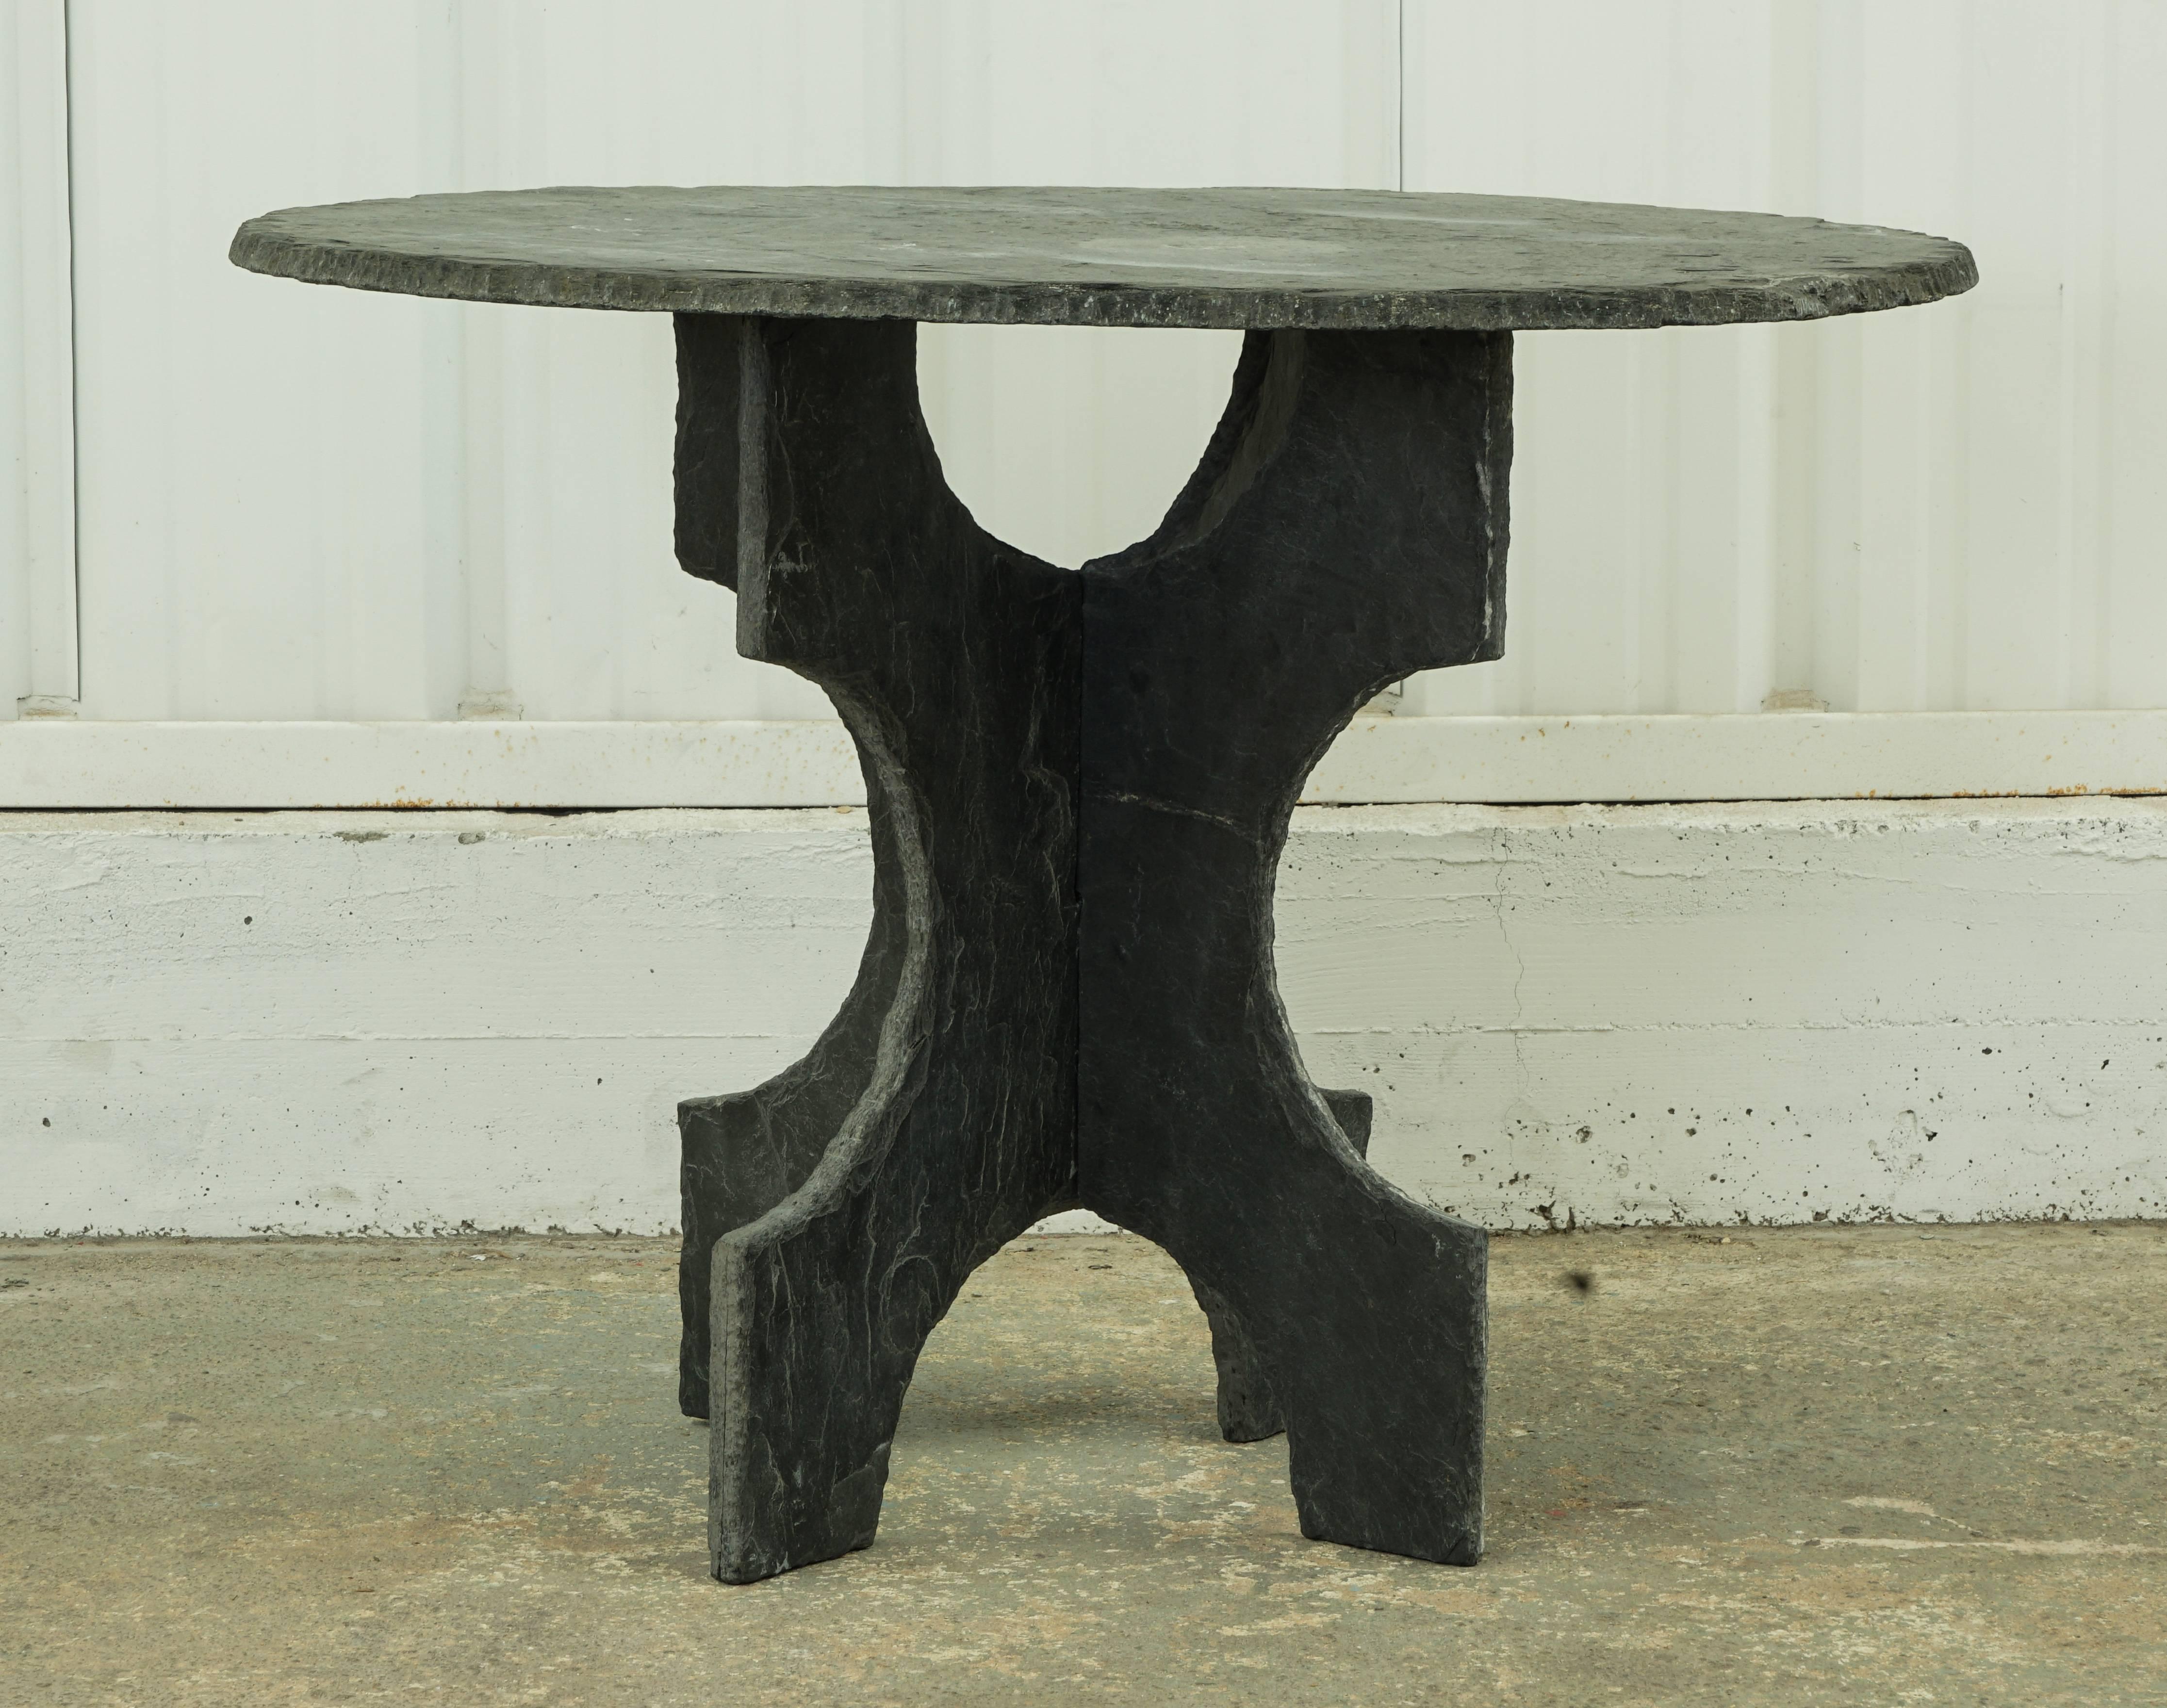 Round, black slate table from France, 1900s. Top and base are separate; base is two pieces that connect via grooves. Fabulous, patinated black slate with great texture.